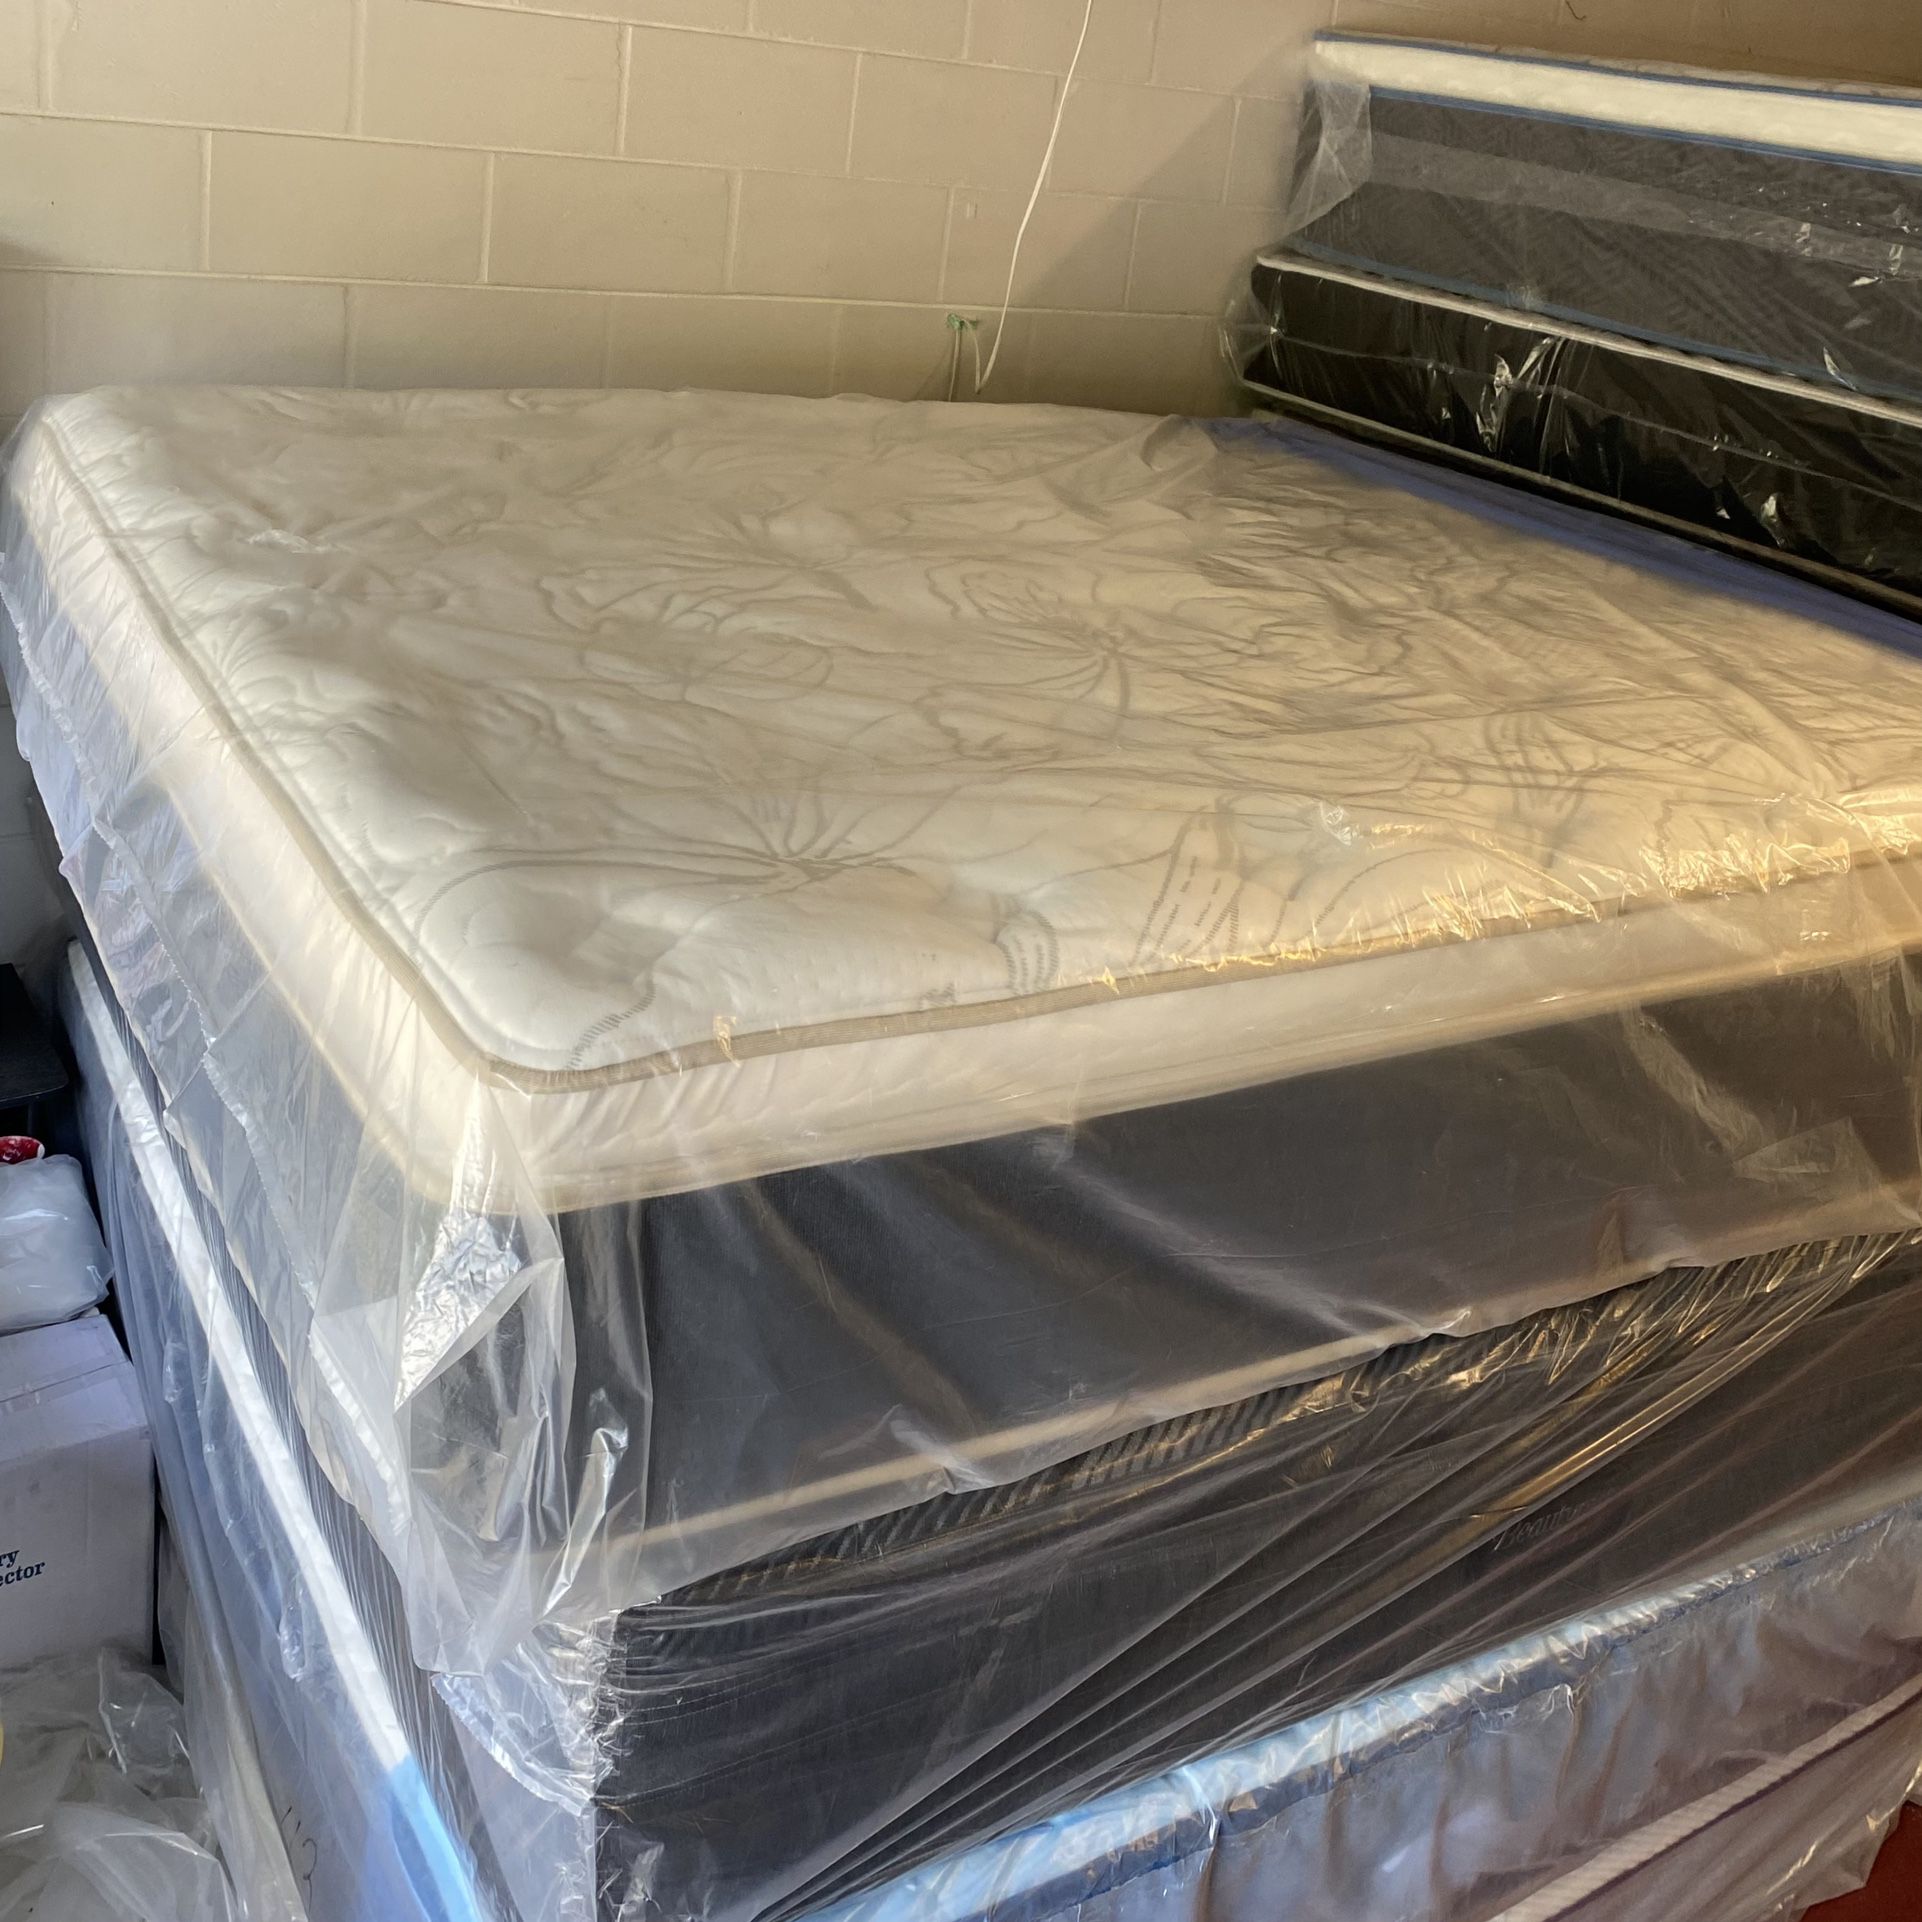 California King Size Mattress 14 Inch Thick With Pillow Top And Box Springs New From Factory Available All Sizes Same Day Delivery 